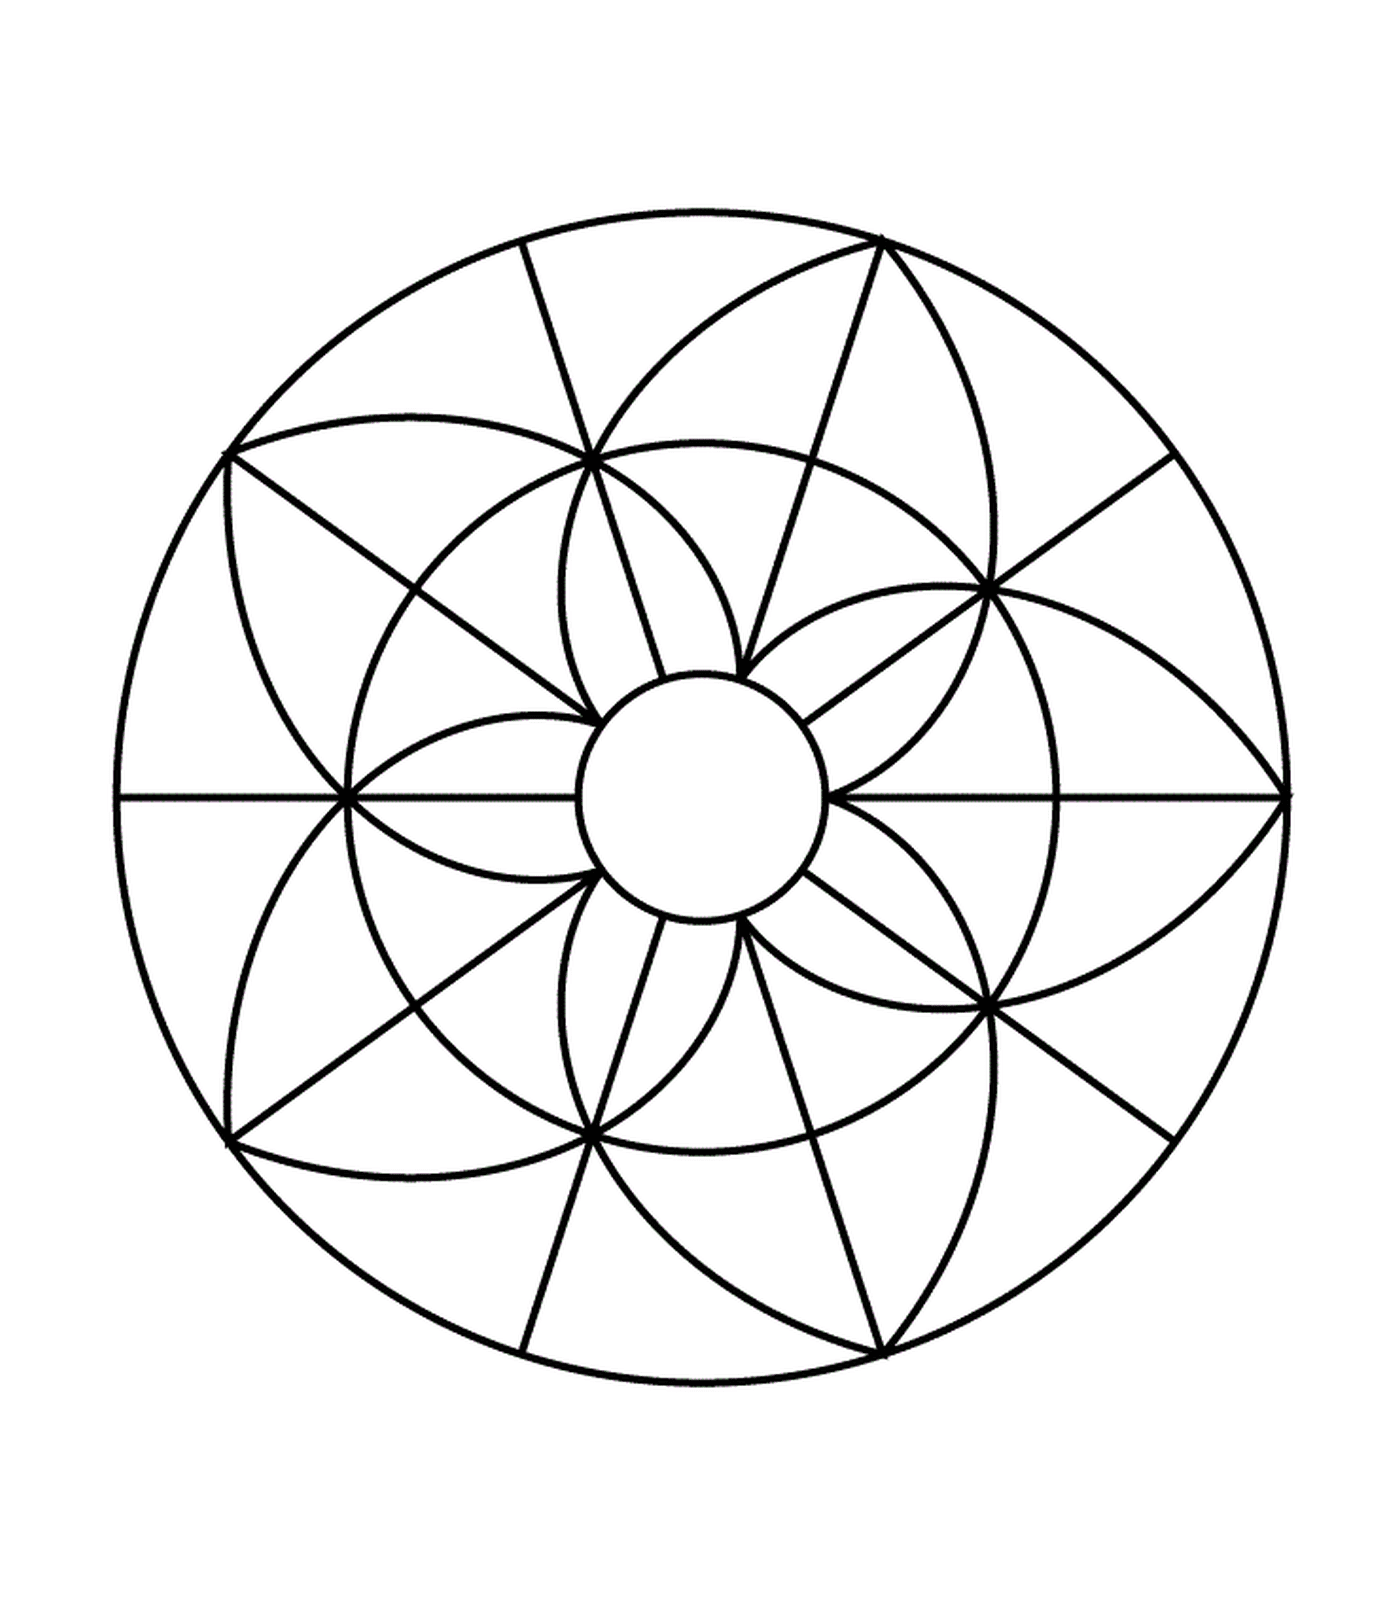  A circle with a floral motif 